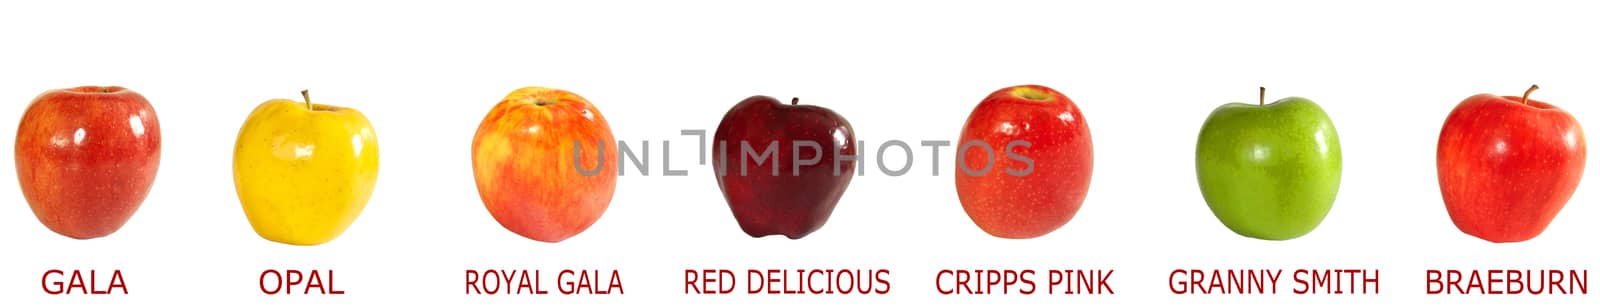 seven different varieties of apples on white background